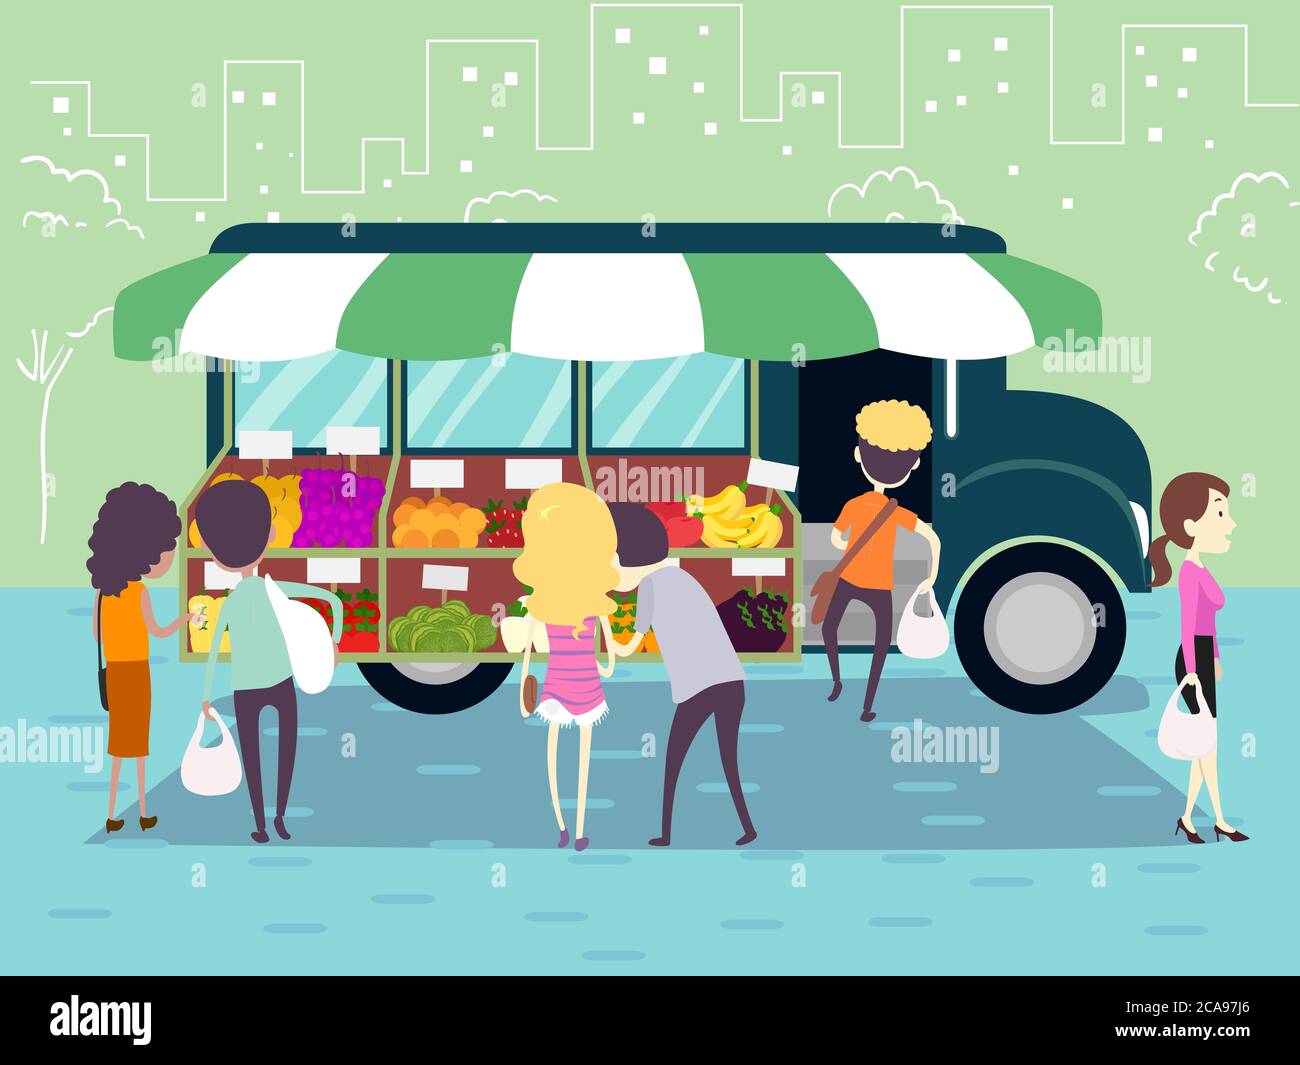 Illustration of Stickman Men and Women Buying Fruits and Vegetables In ...